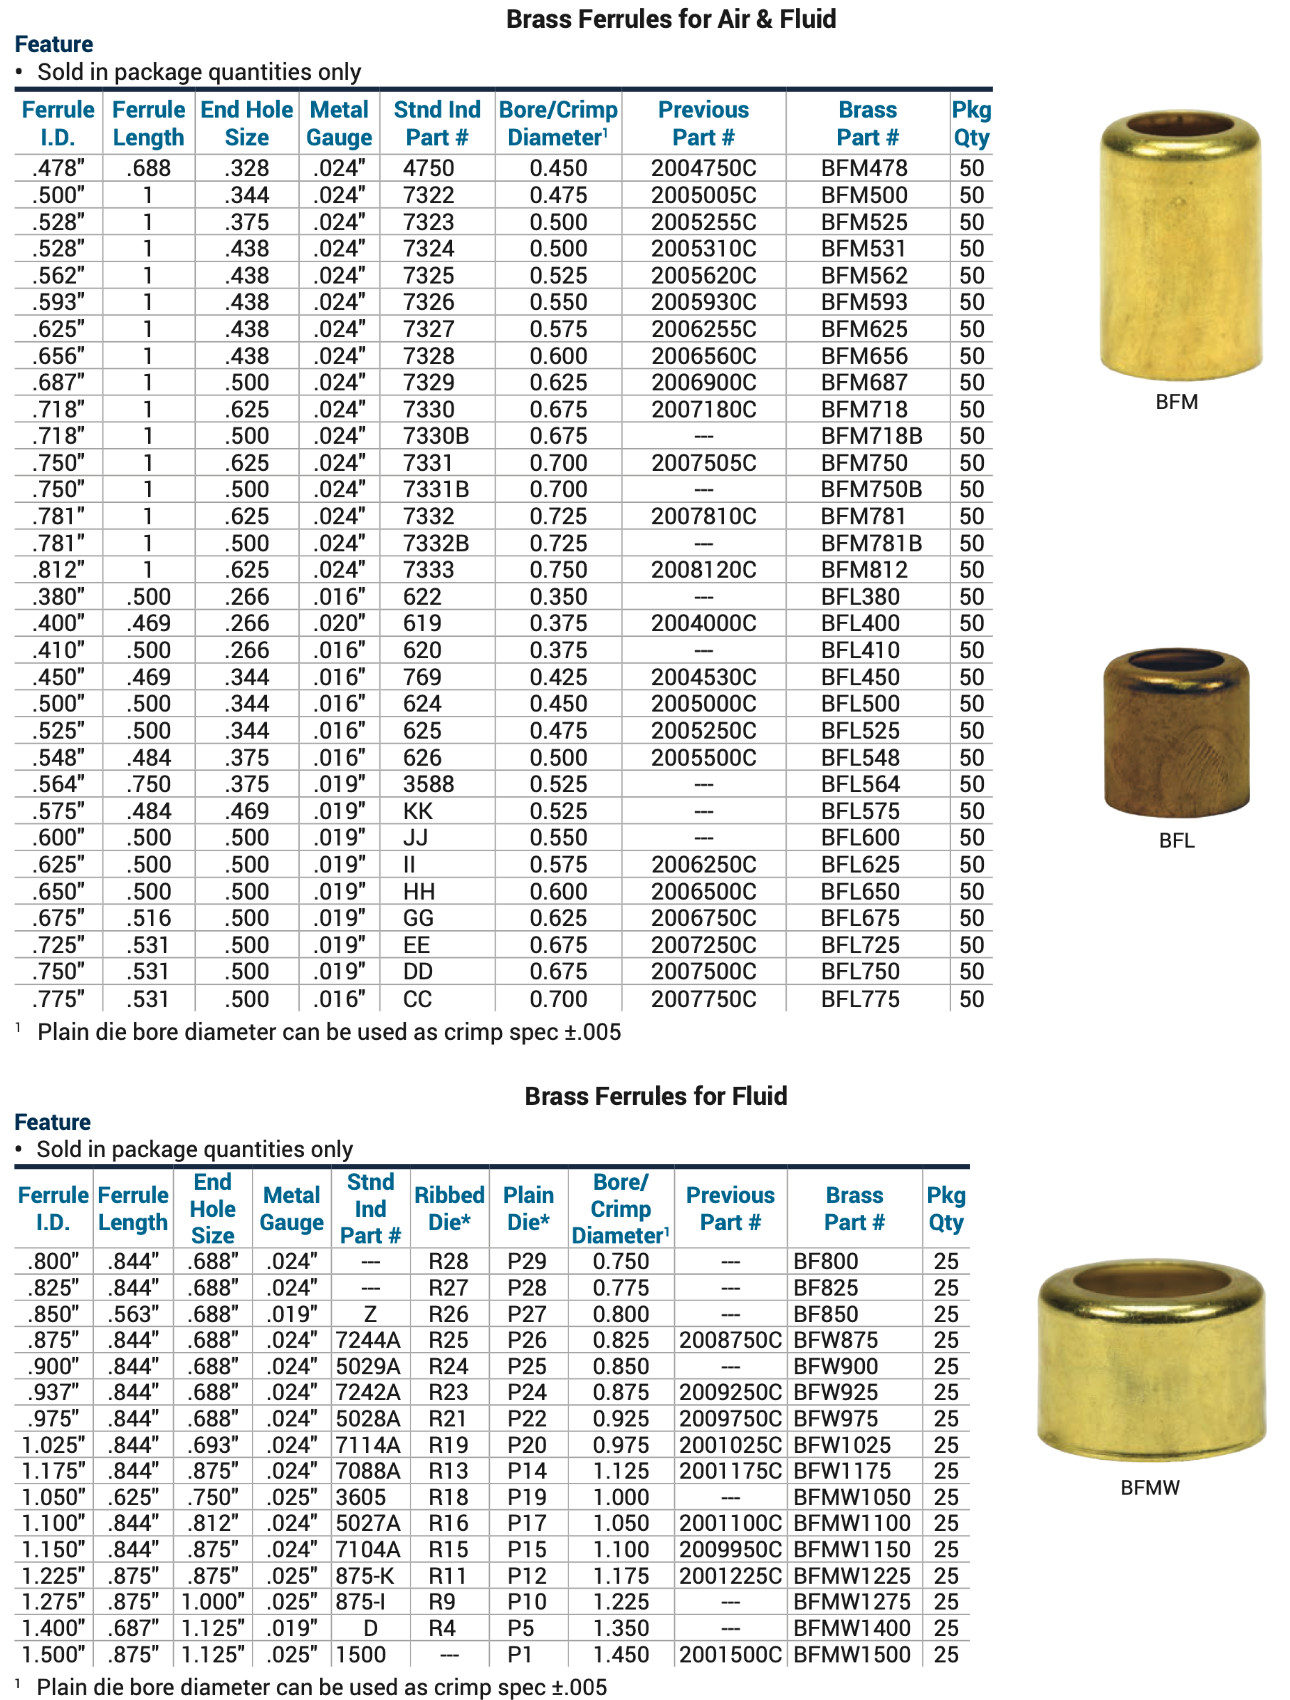 Brass Ferrule Tube Fittings, Thread Size: Bsp, Size: 1/8 To 2 at